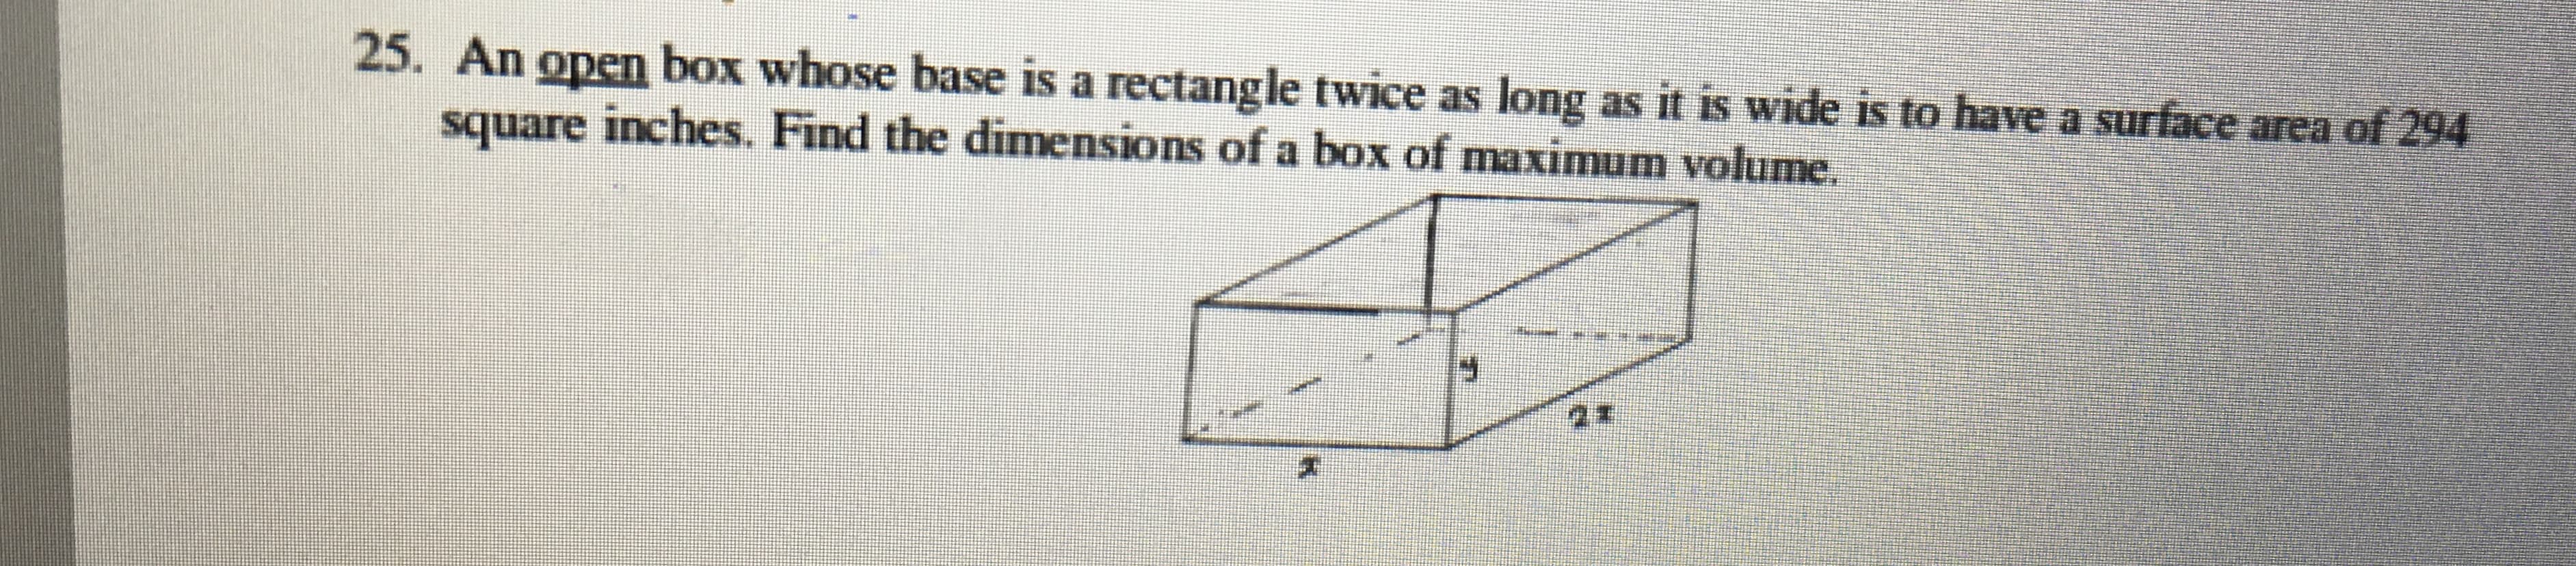 25. An open box whose base is a rectangle twice as long as it is wide is to have a surface area of 294
square inches. Find the dimensions of a box of maximum volume.
F.
